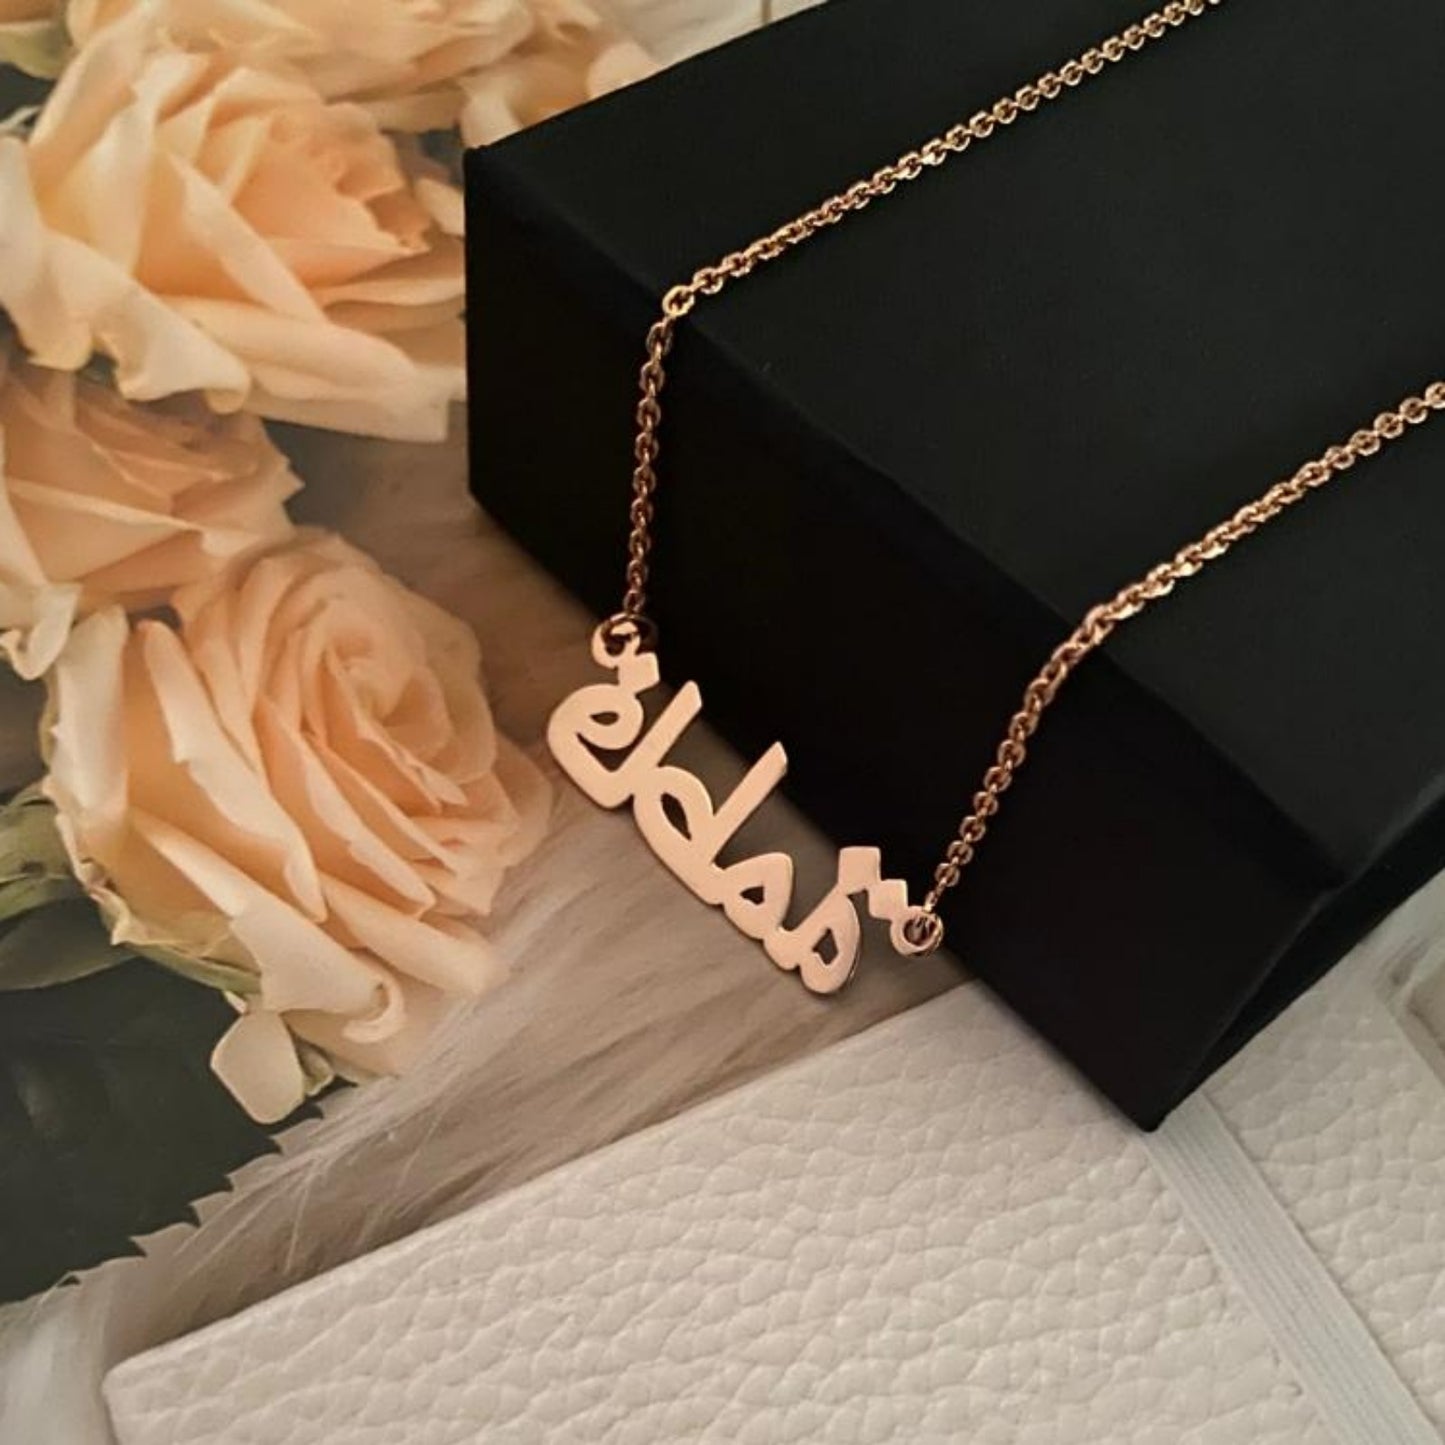 Personalised Arabic Name Necklace in 92.5 Sterling Silver